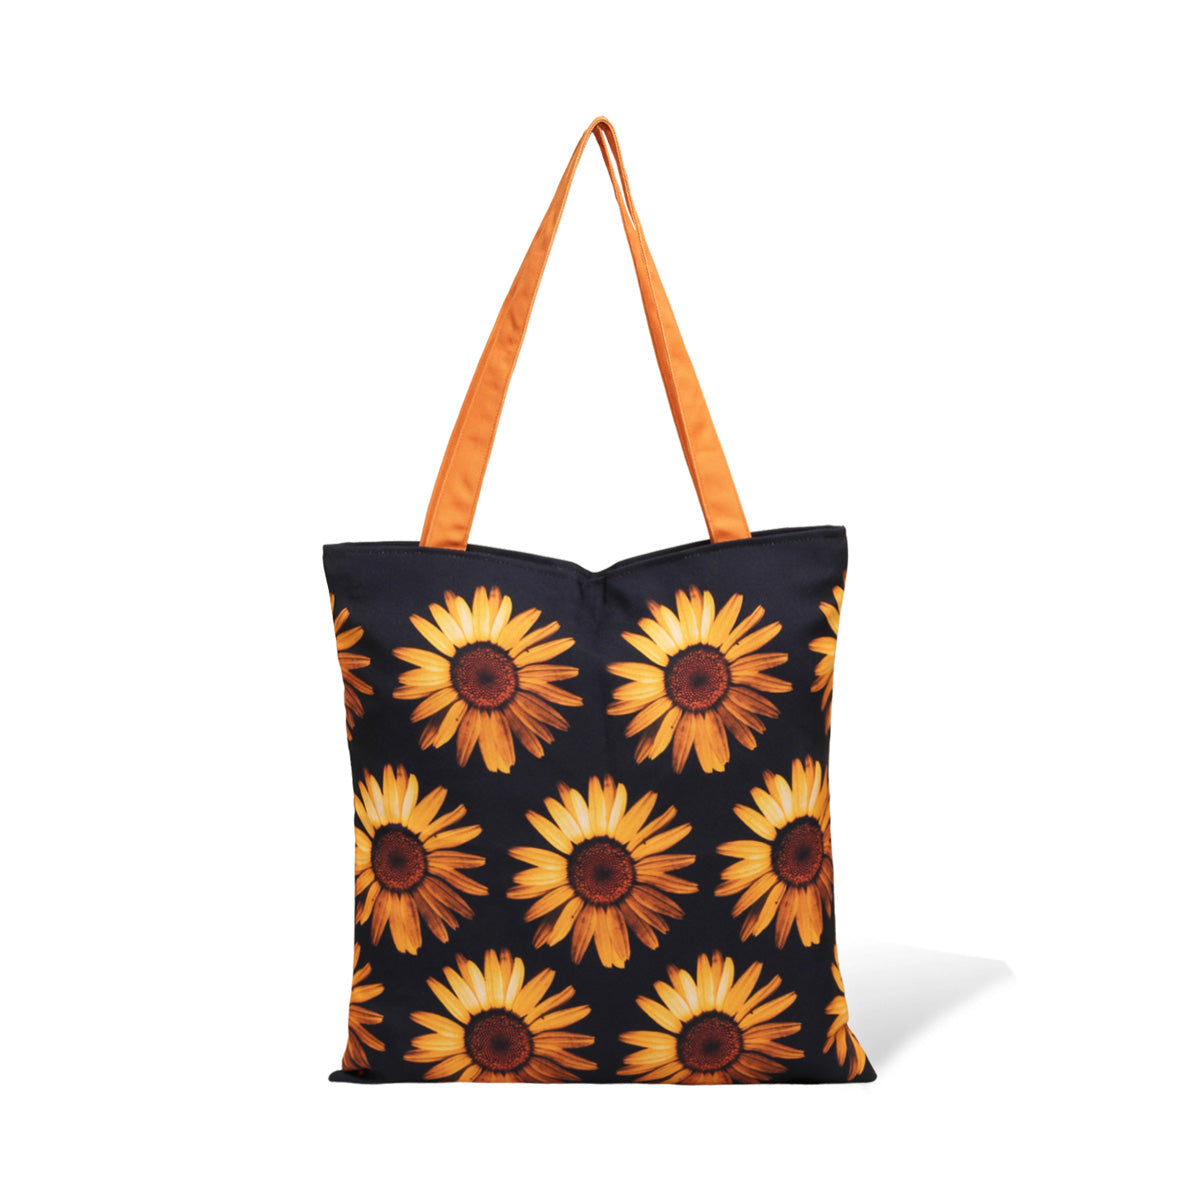 Sunflower Cotton Canvas Tote Bags